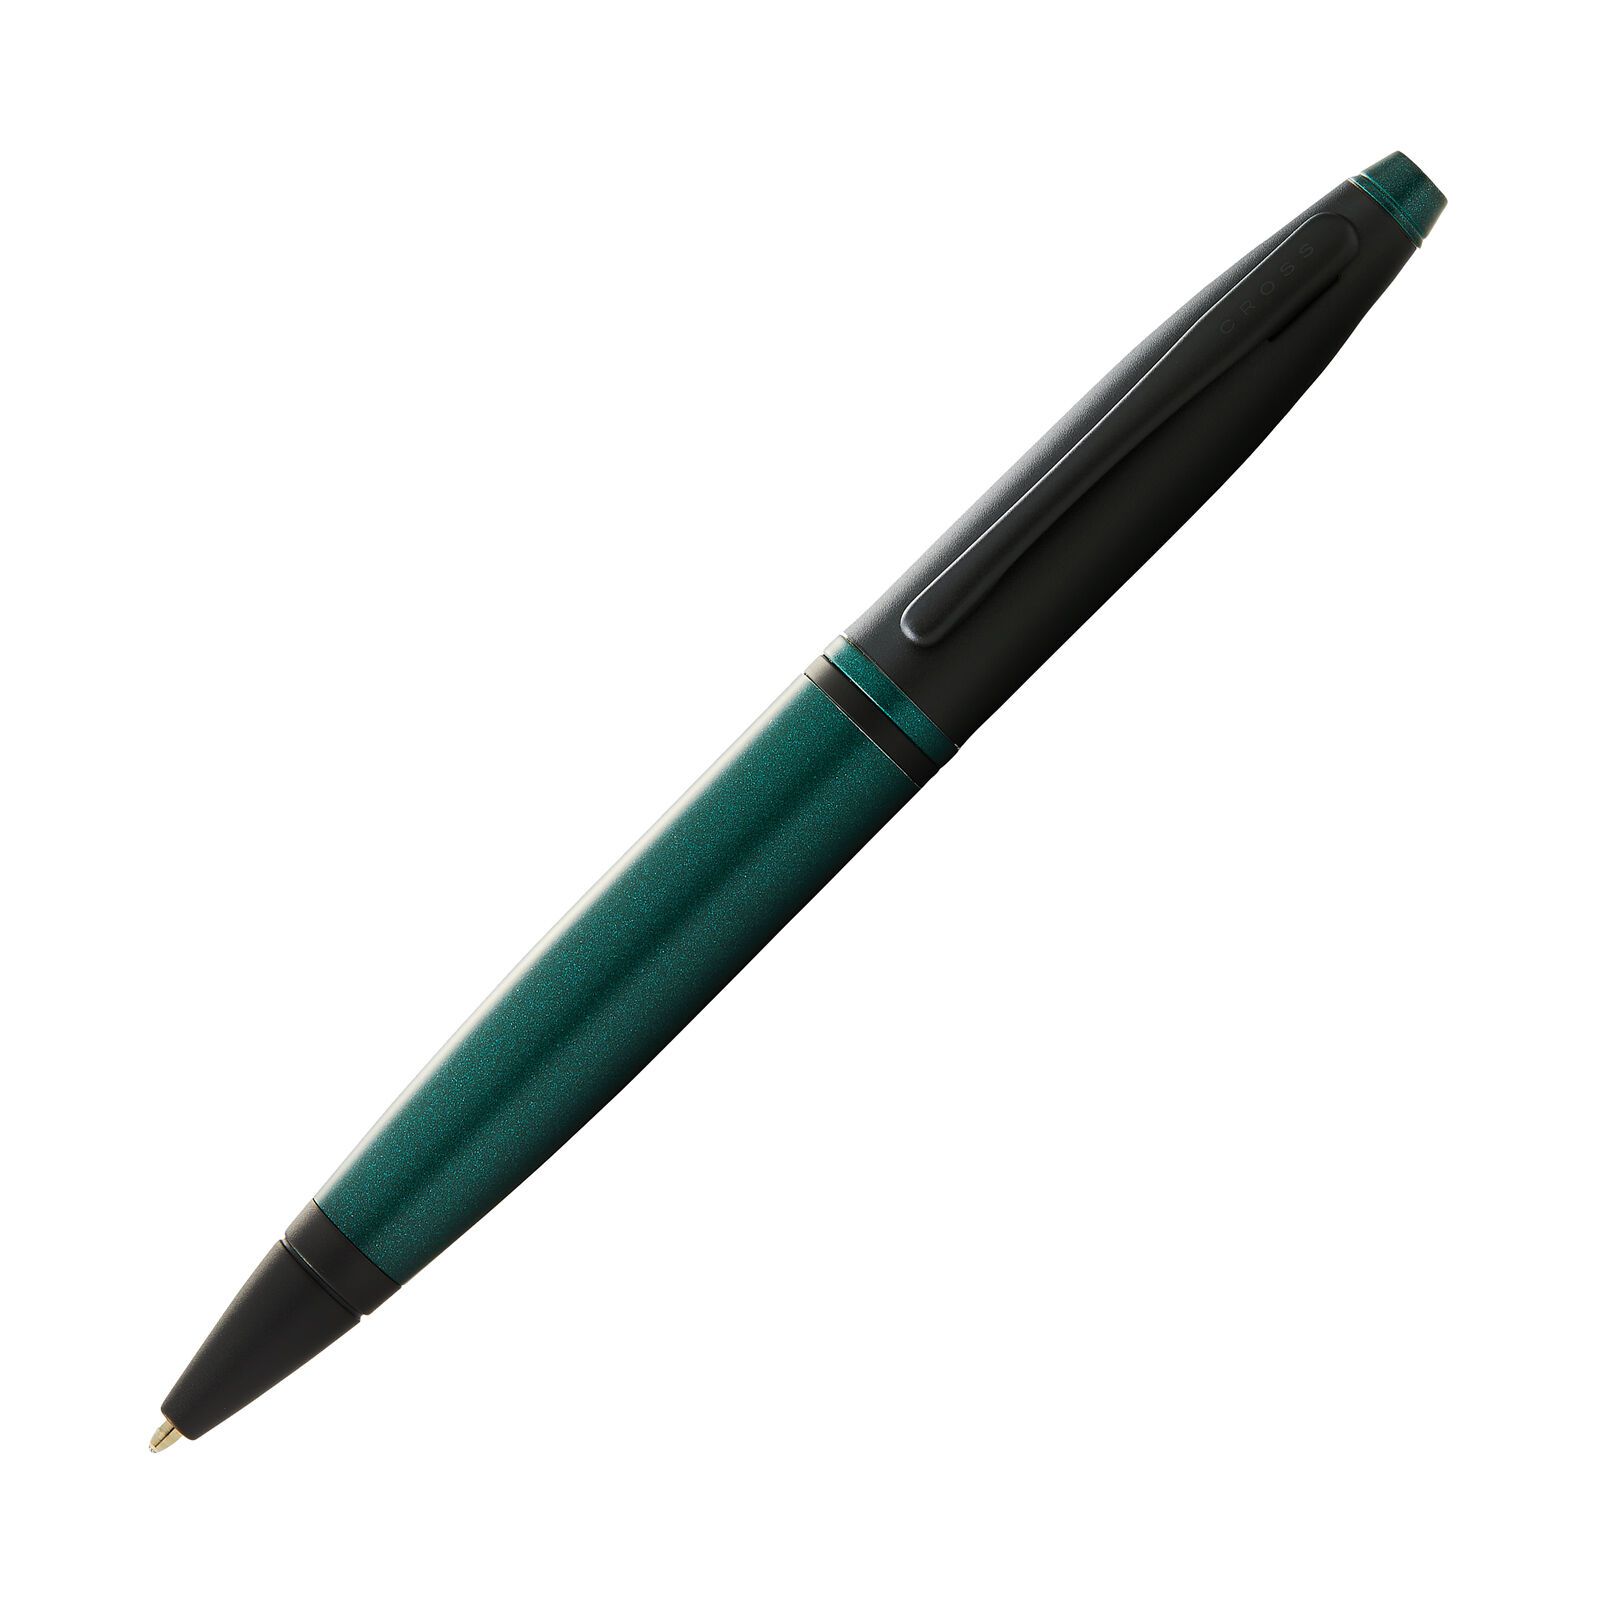 Cross Calais Ballpoint Pen in Matte Green Lacquer with Black Trim - NEW in Box